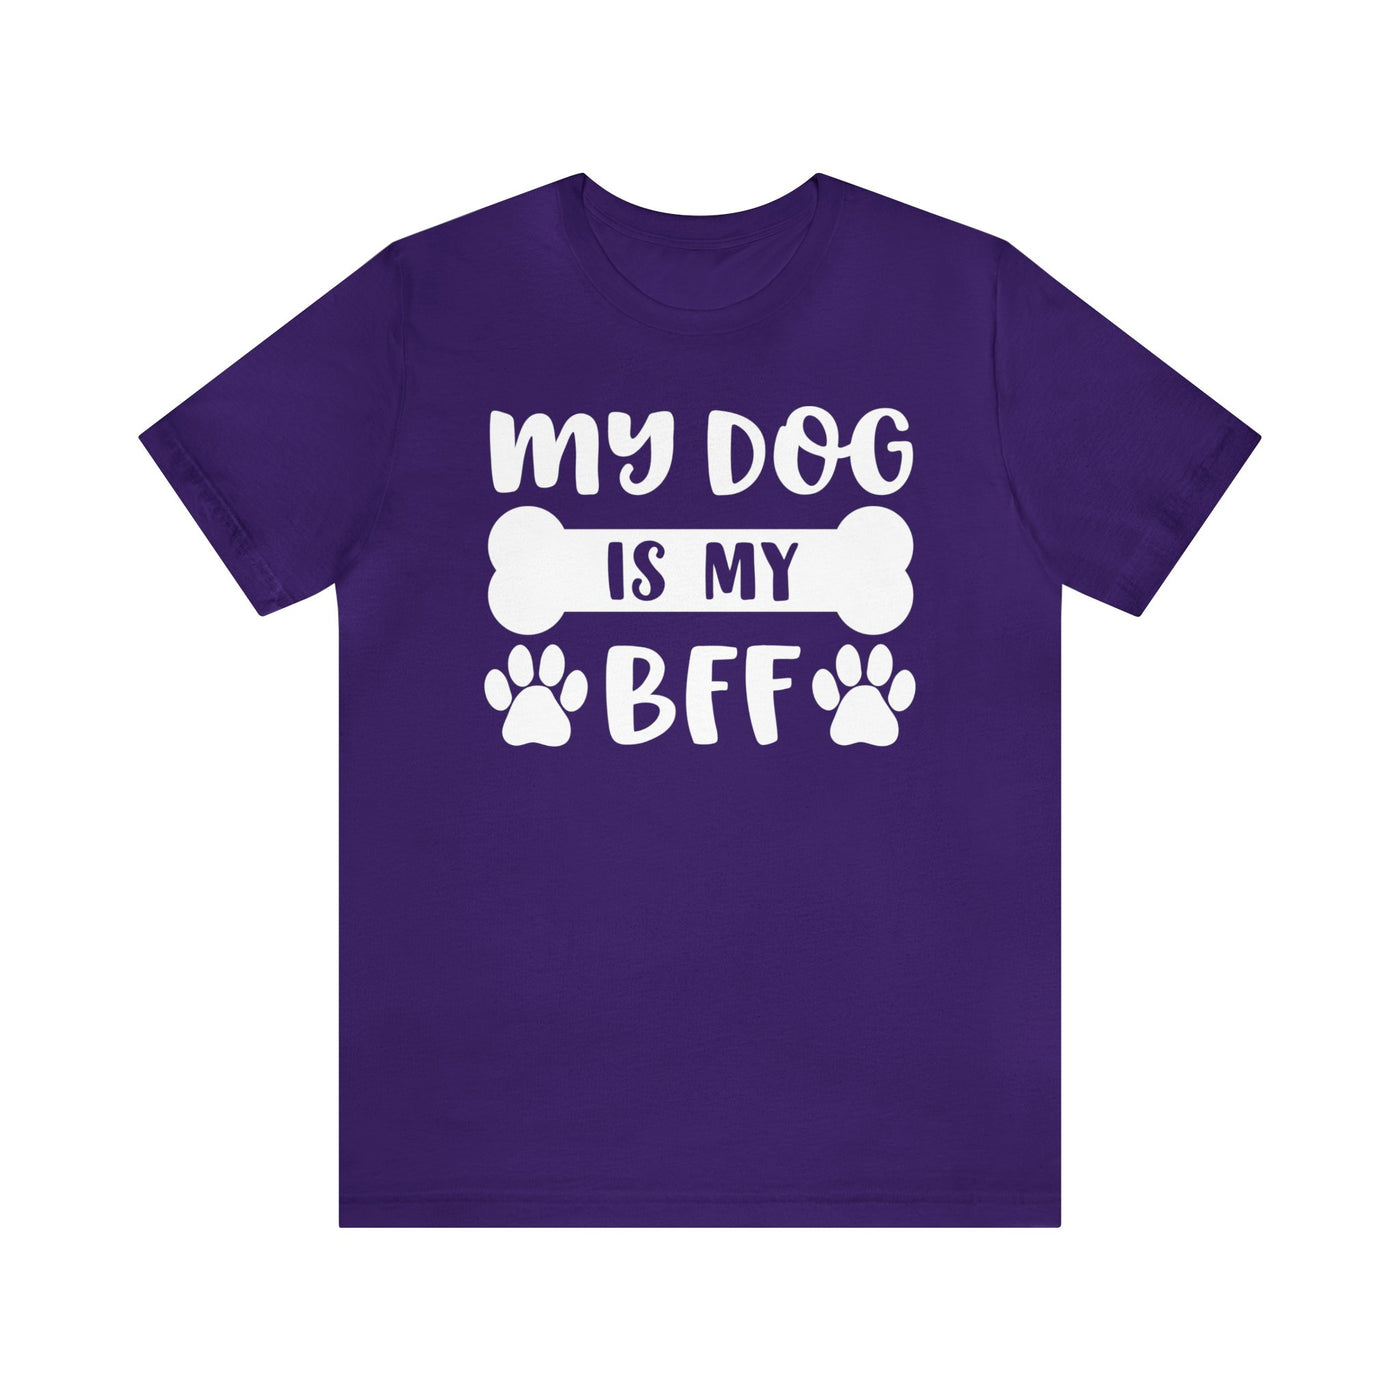 Dog Is My Bff T-Shirt